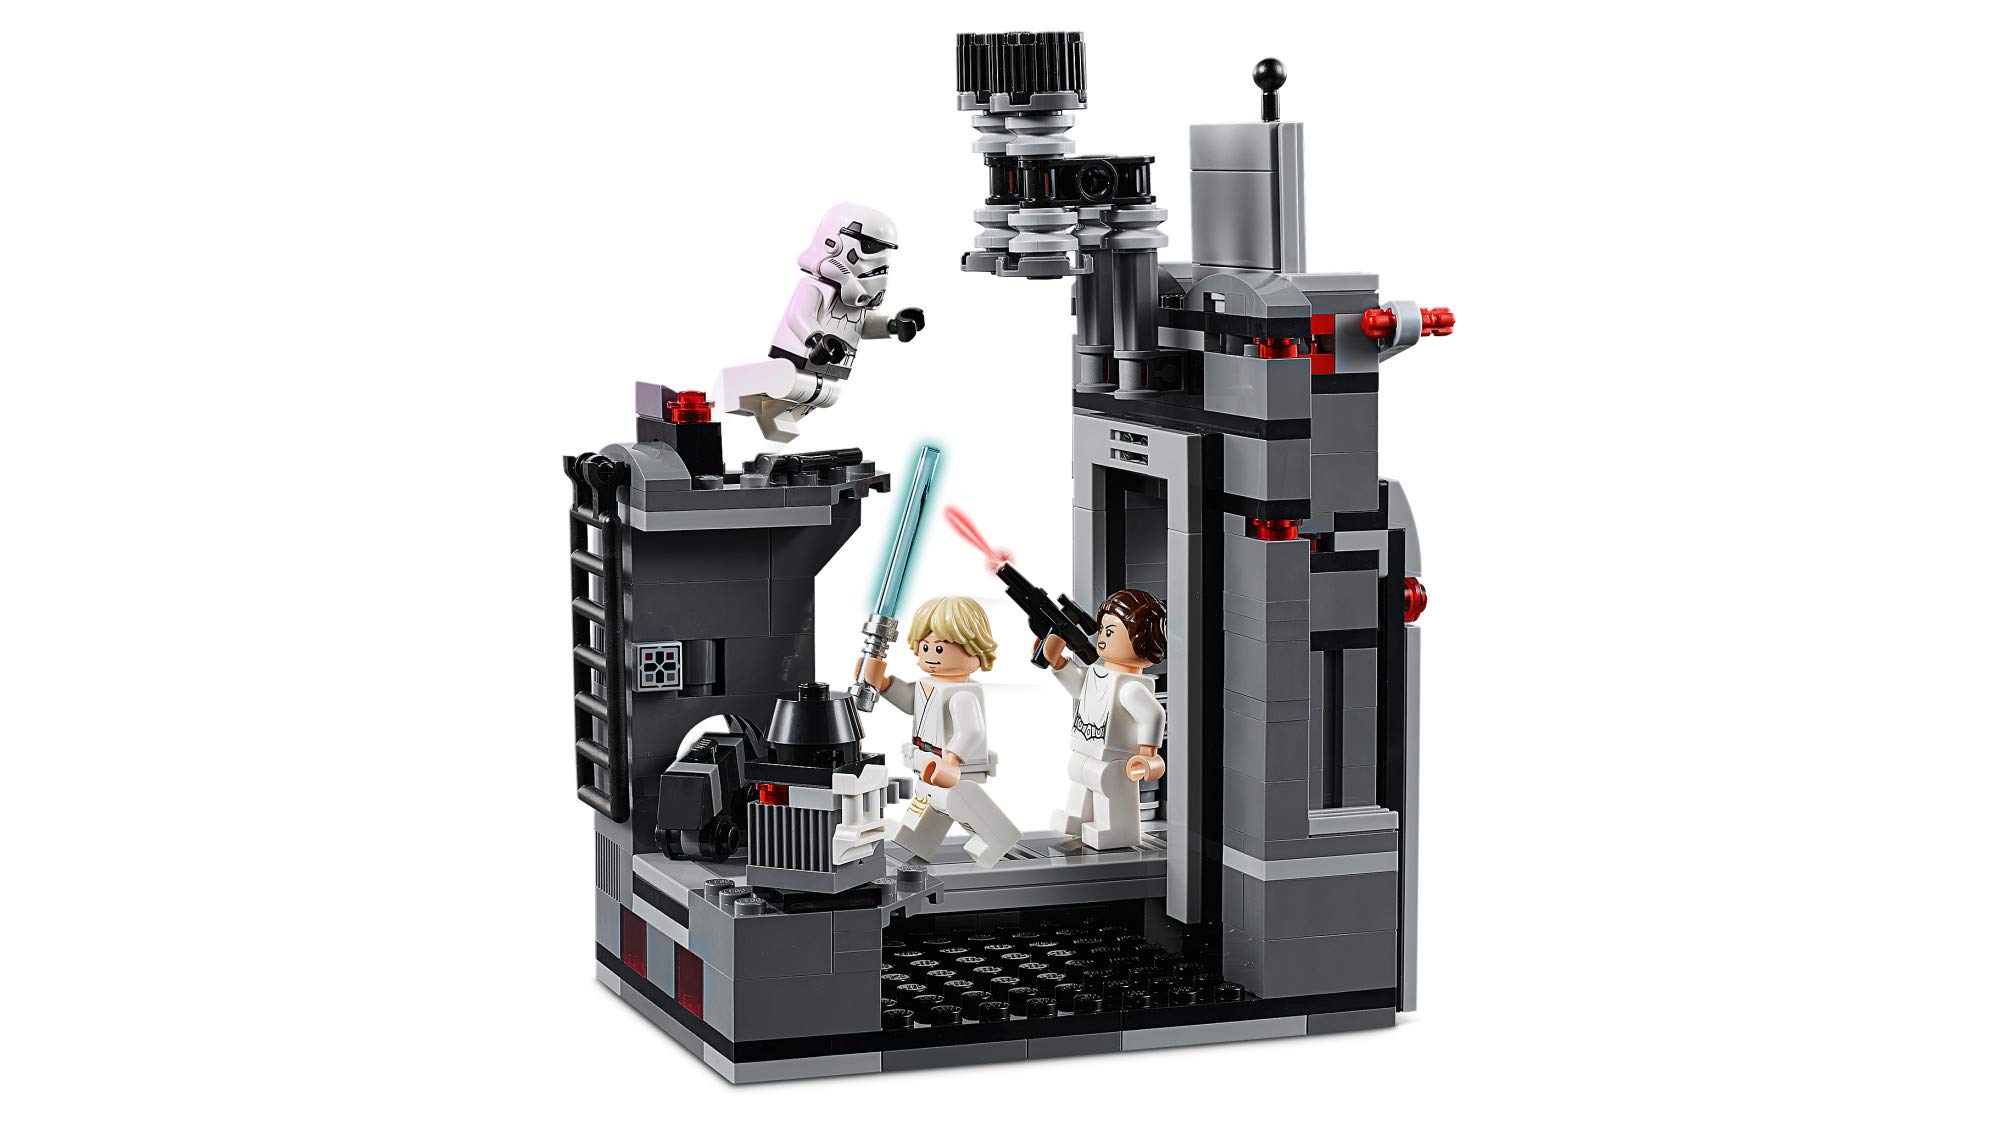 LEGO Star Wars: A New Hope Death Star Escape 75229 Building Kit (329 Pieces) (Discontinued by Manufacturer)